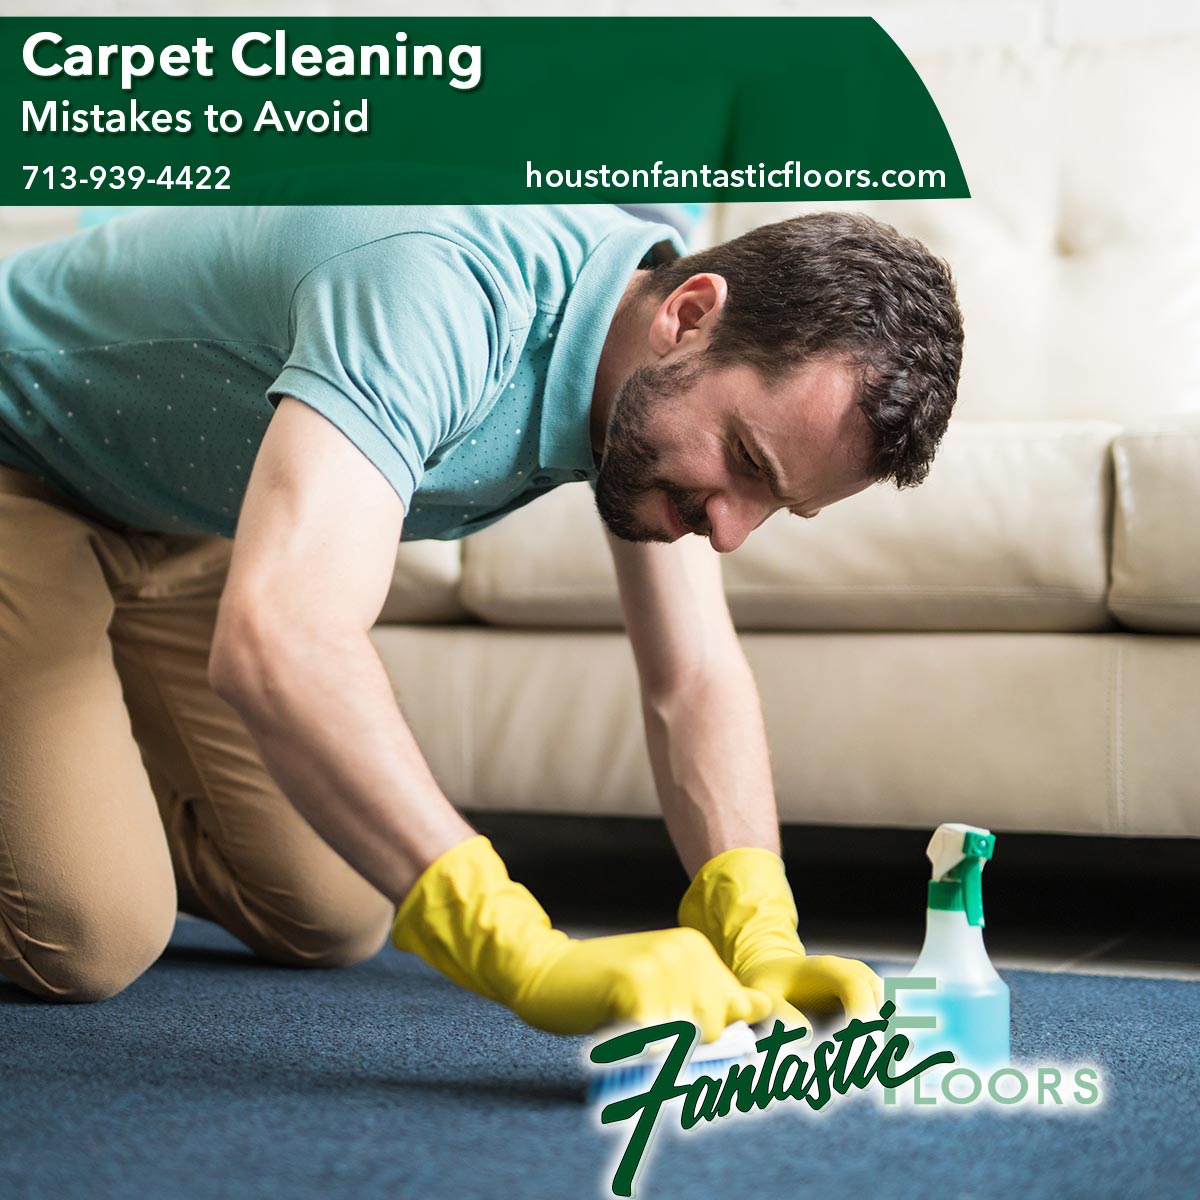 10 Carpet Cleaning Companies in Houston